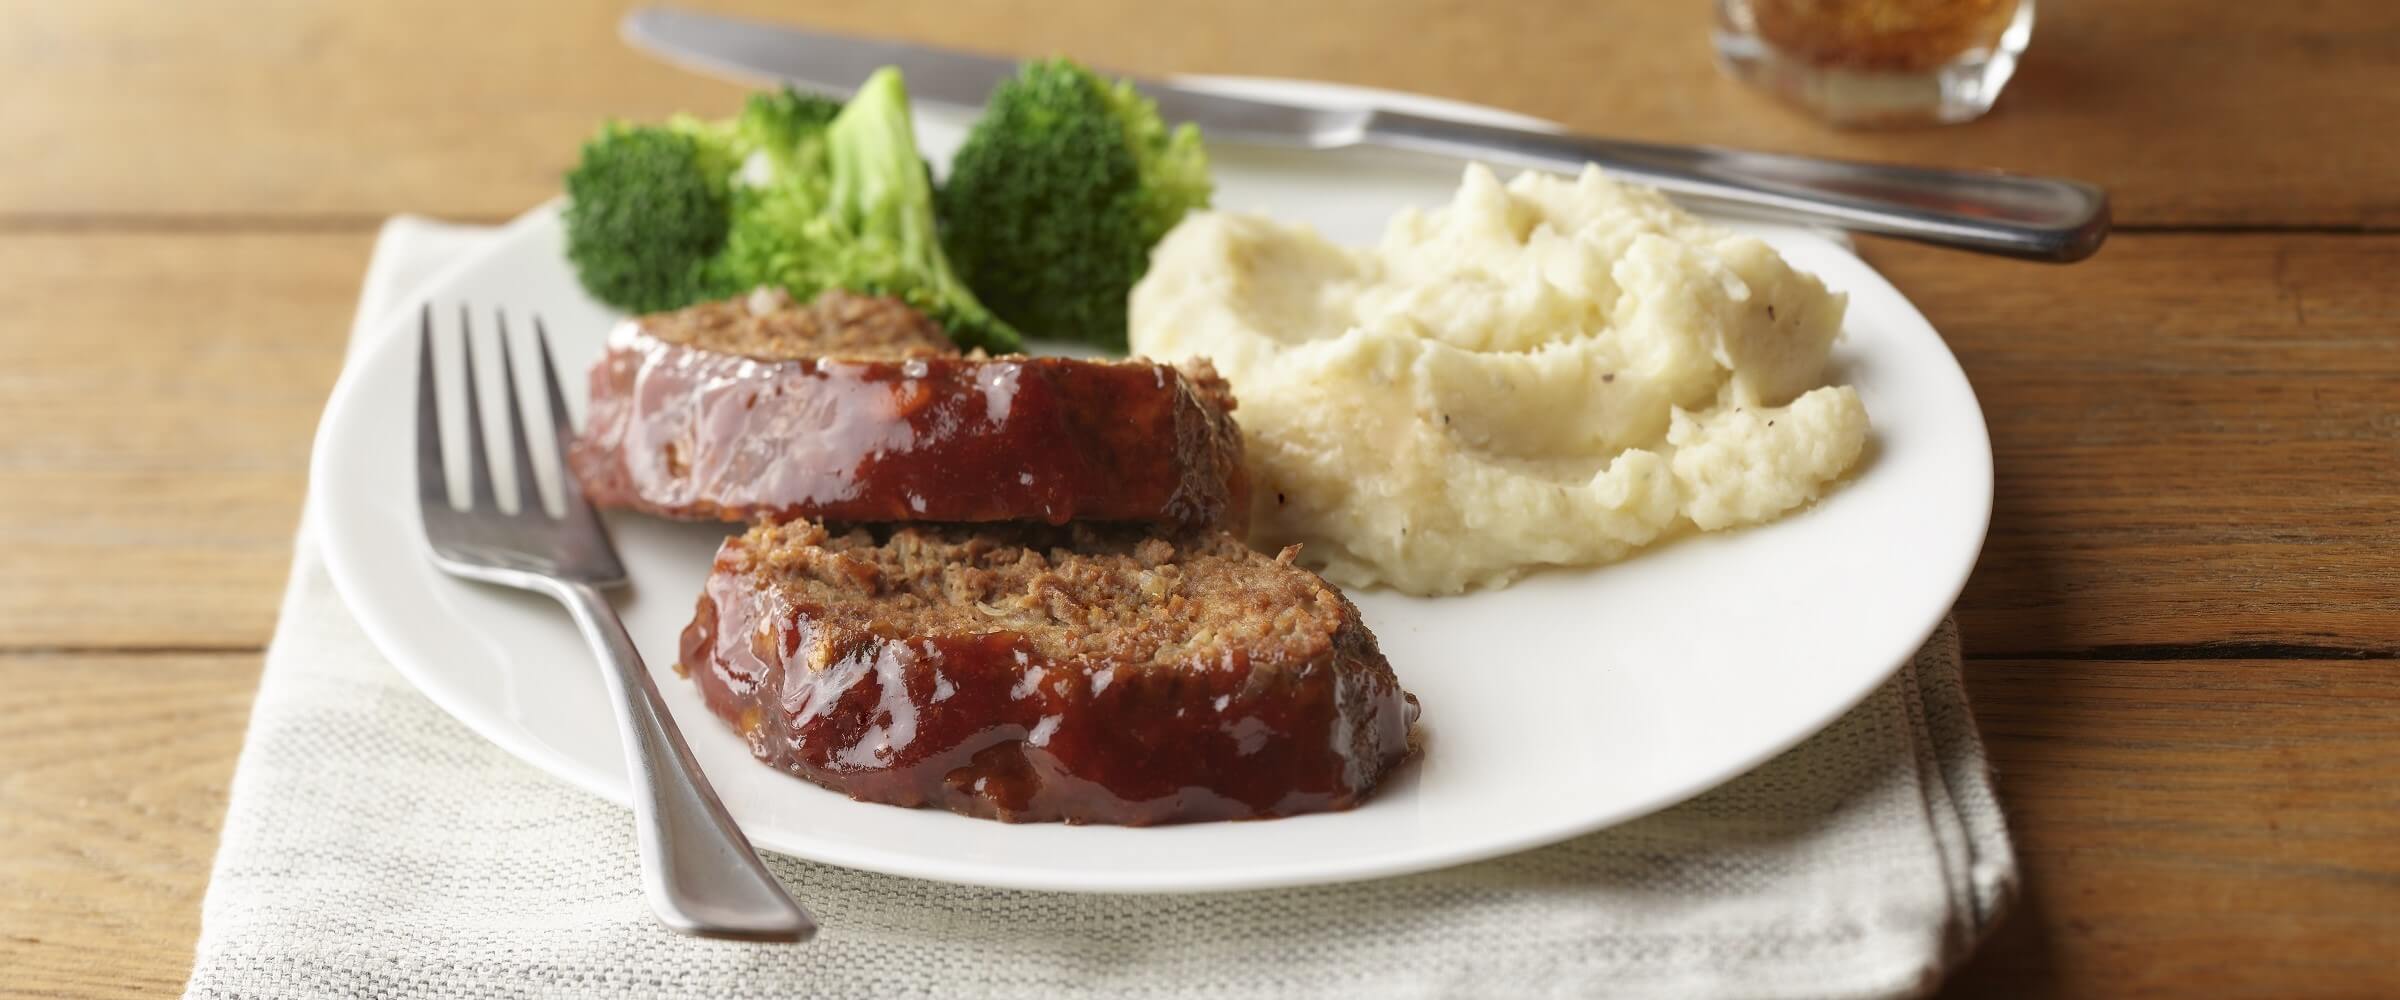 Glazed meatloaf with mashed potatoes and broccoli on a white plate with silverware